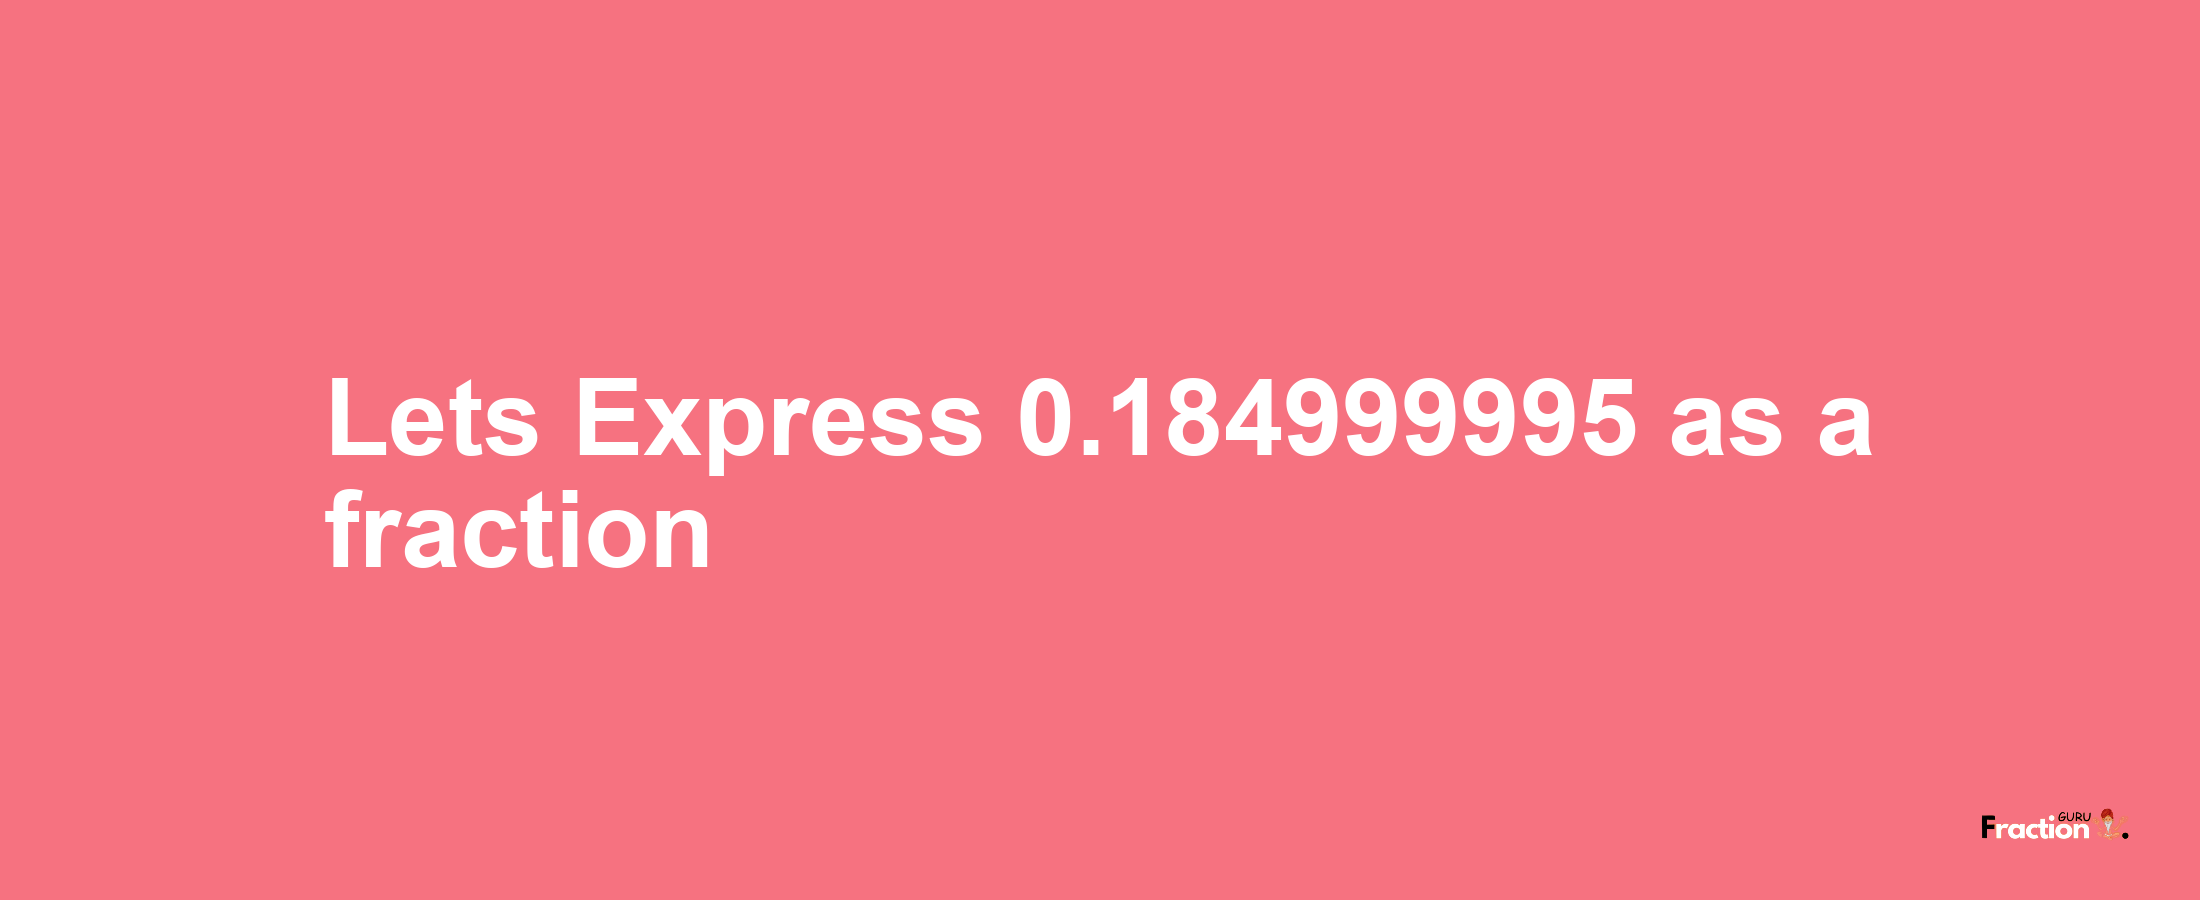 Lets Express 0.184999995 as afraction